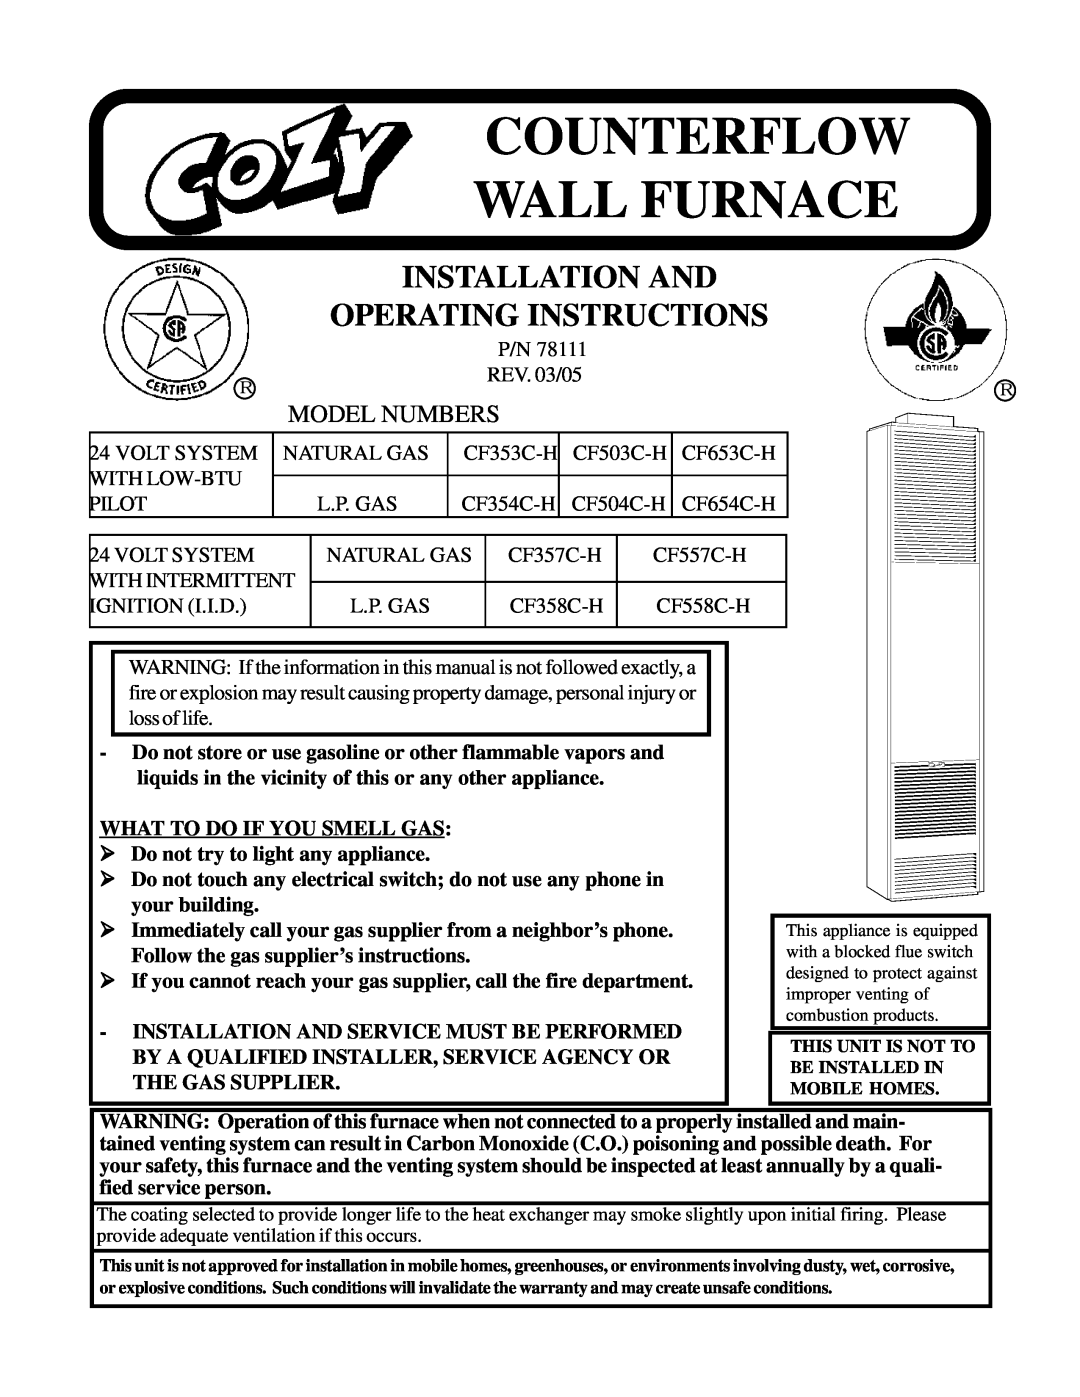 Louisville Tin and Stove CF654C-H, CF504C-H, CF354C-H operating instructions Model Numbers, What To Do If You Smell Gas 